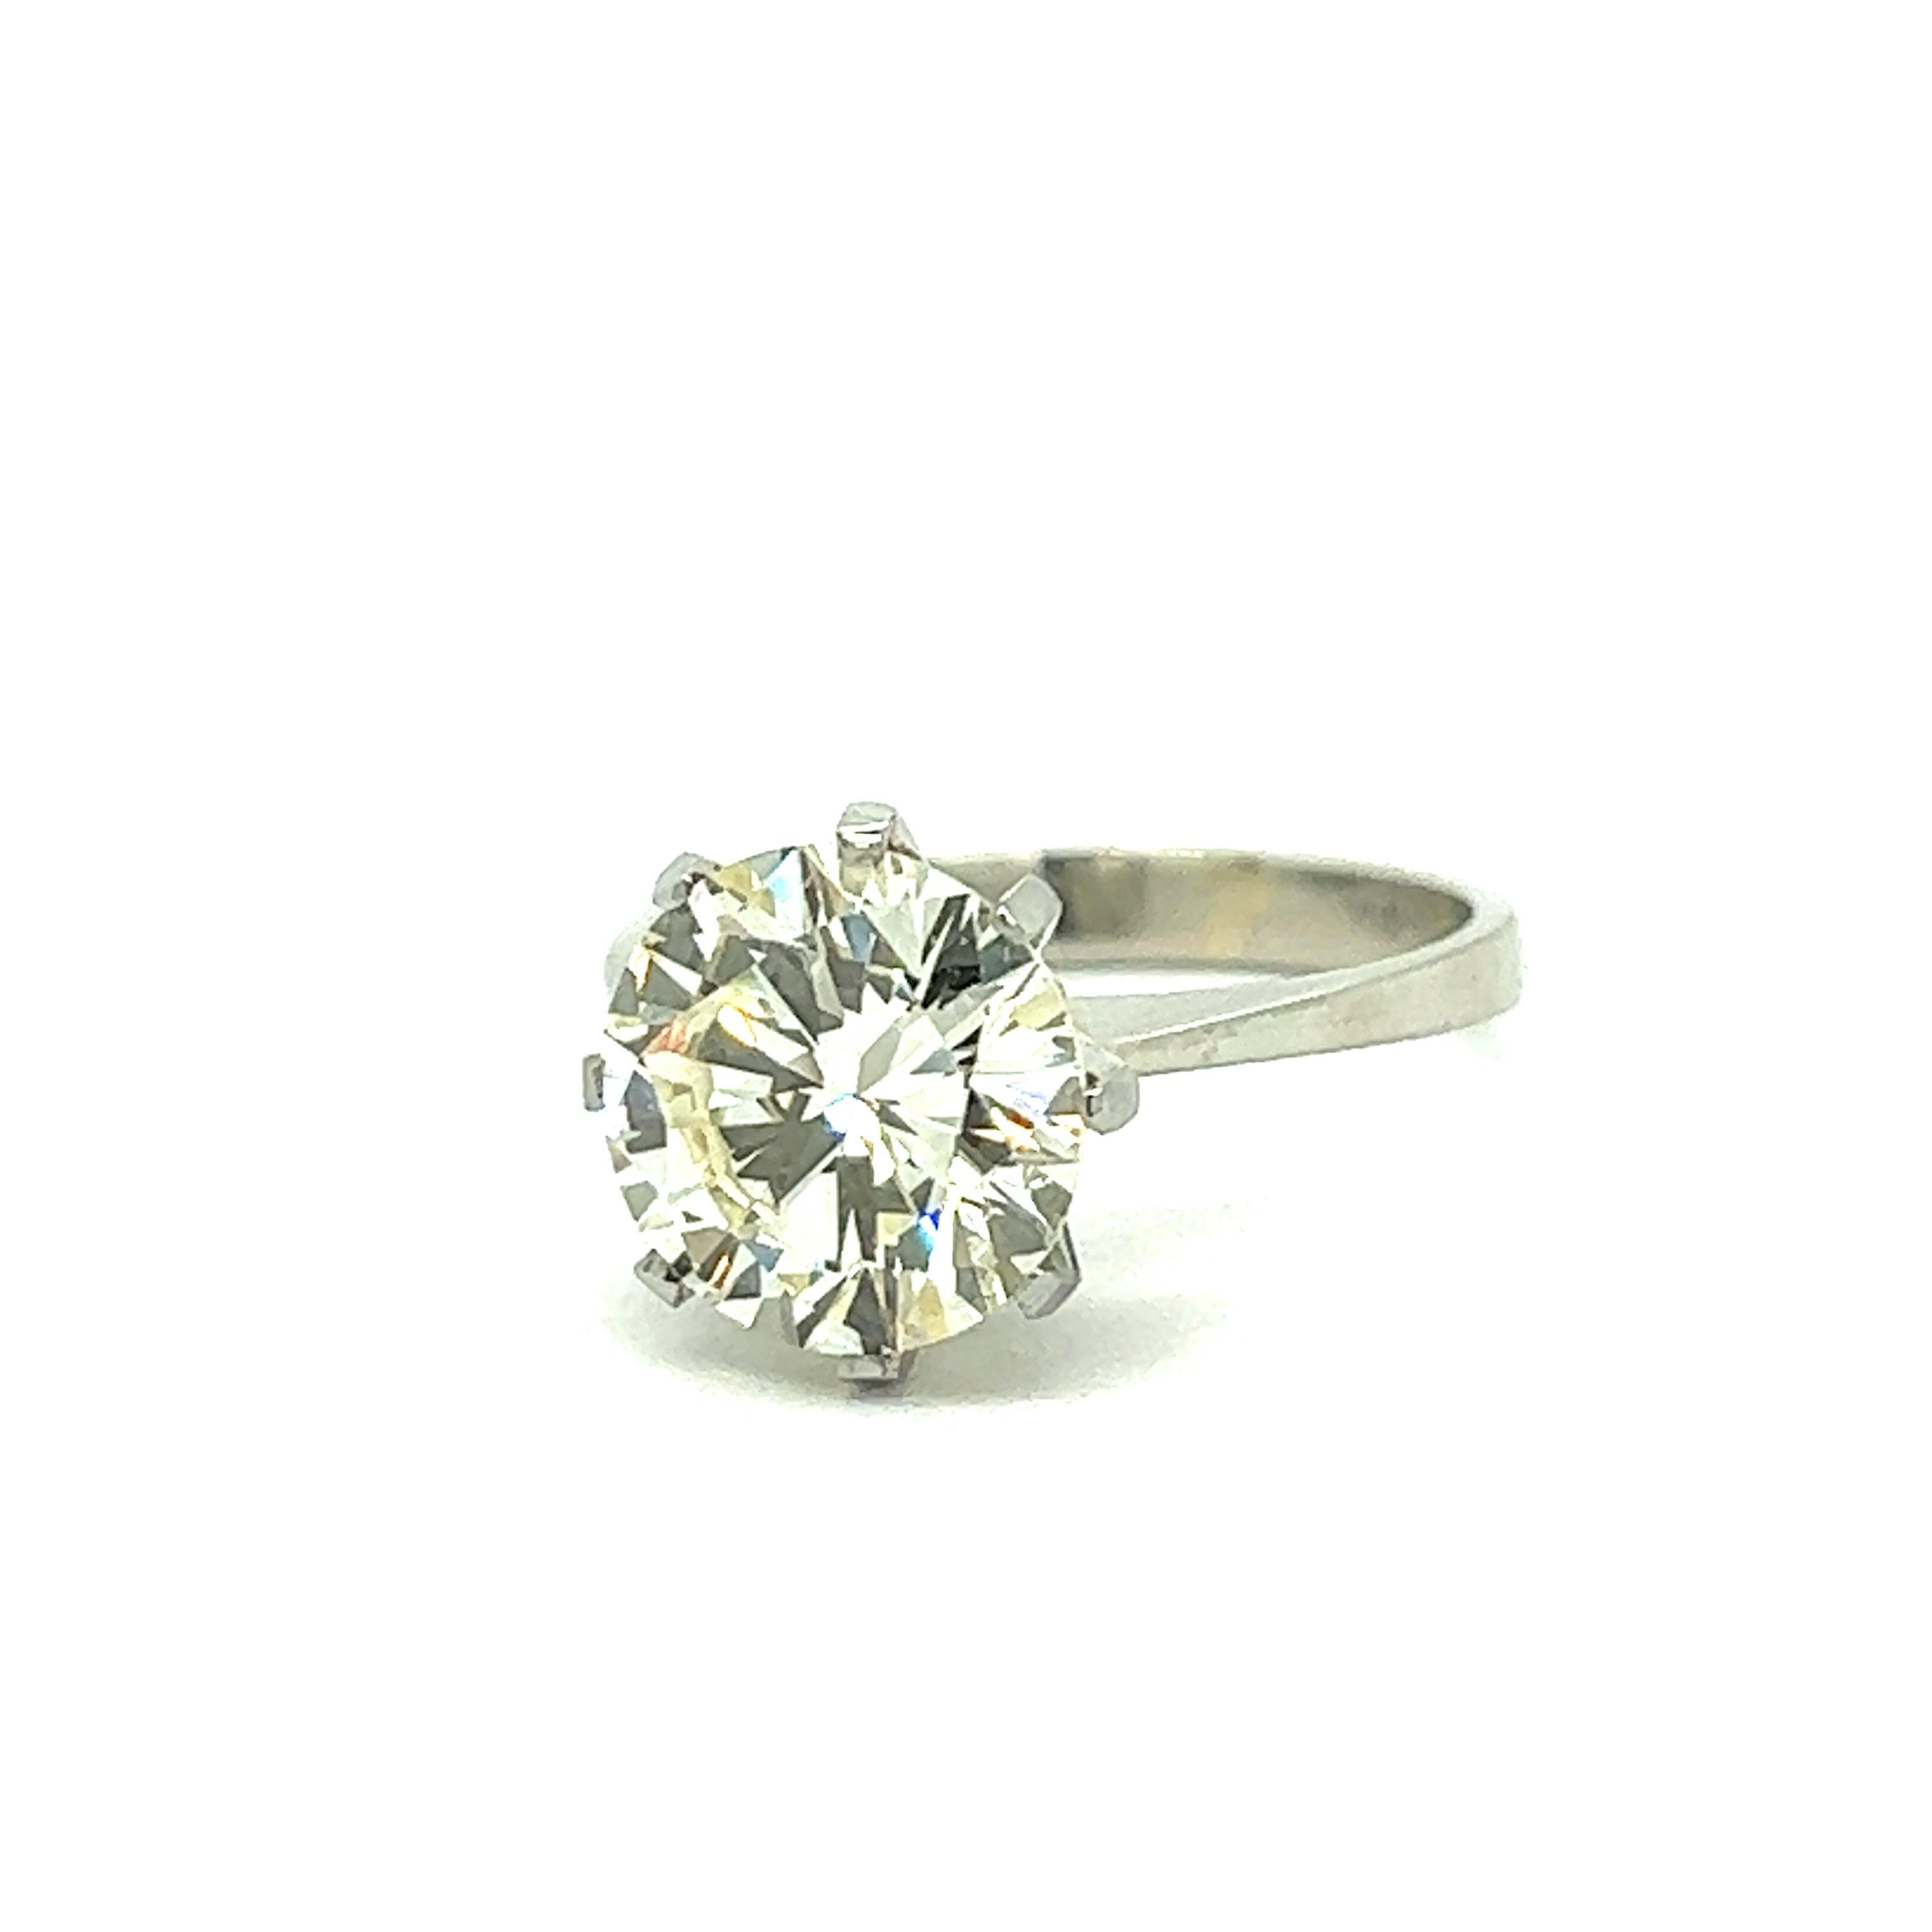 3.42 cts Diamond Solitaire Engagement Ring For Sale 3